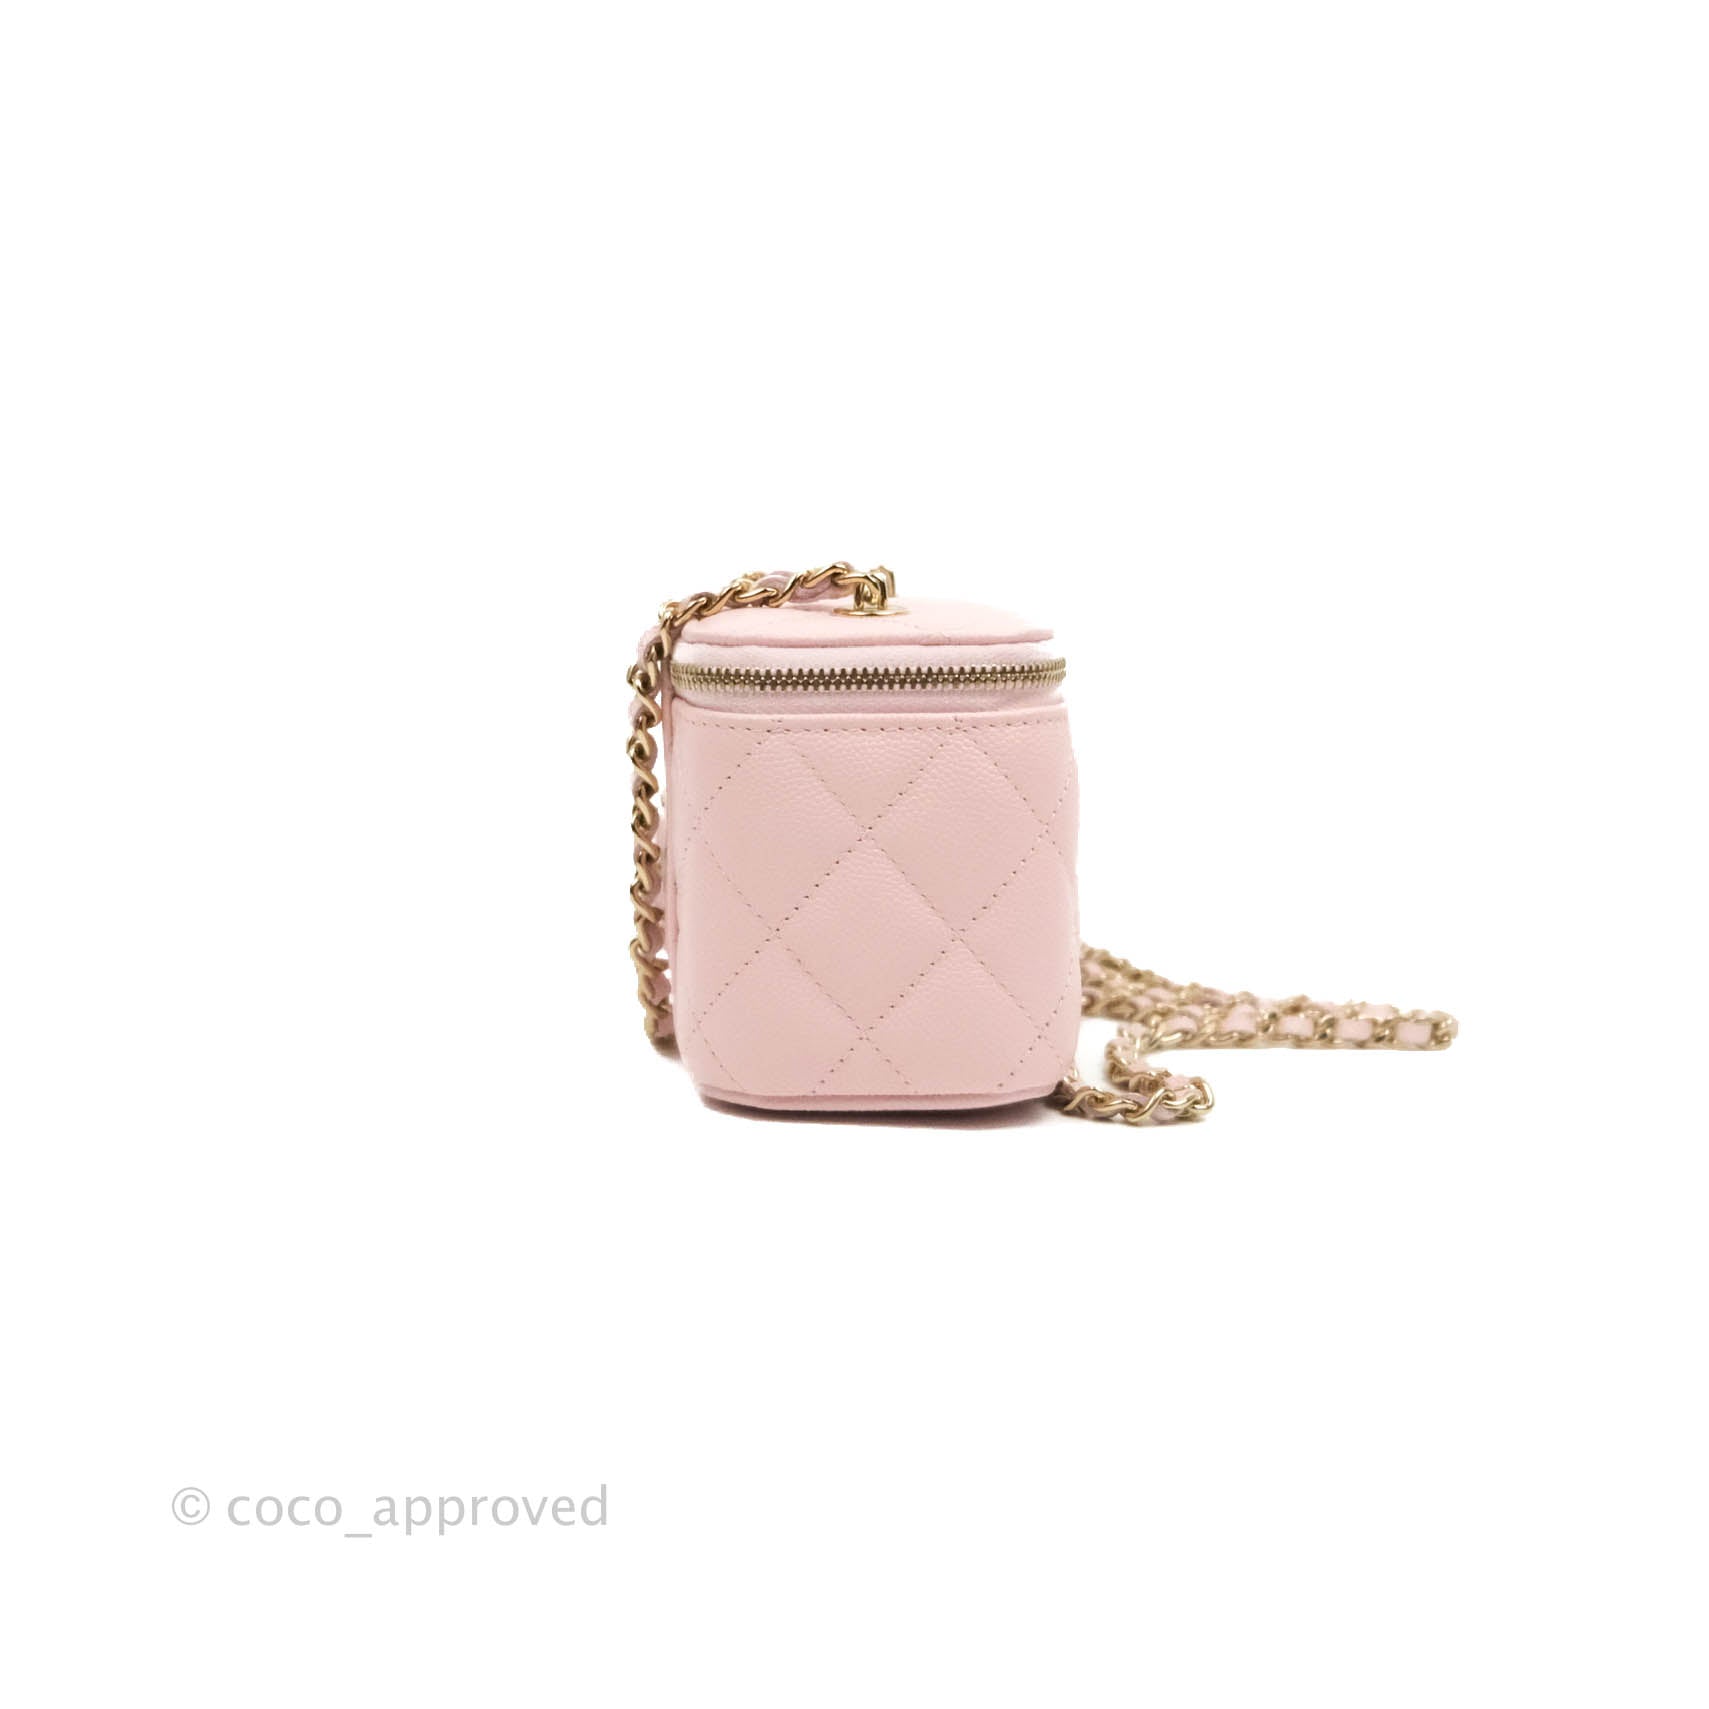 Chanel Mini Vanity With Chain Pink Caviar Gold Hardware – Coco Approved  Studio